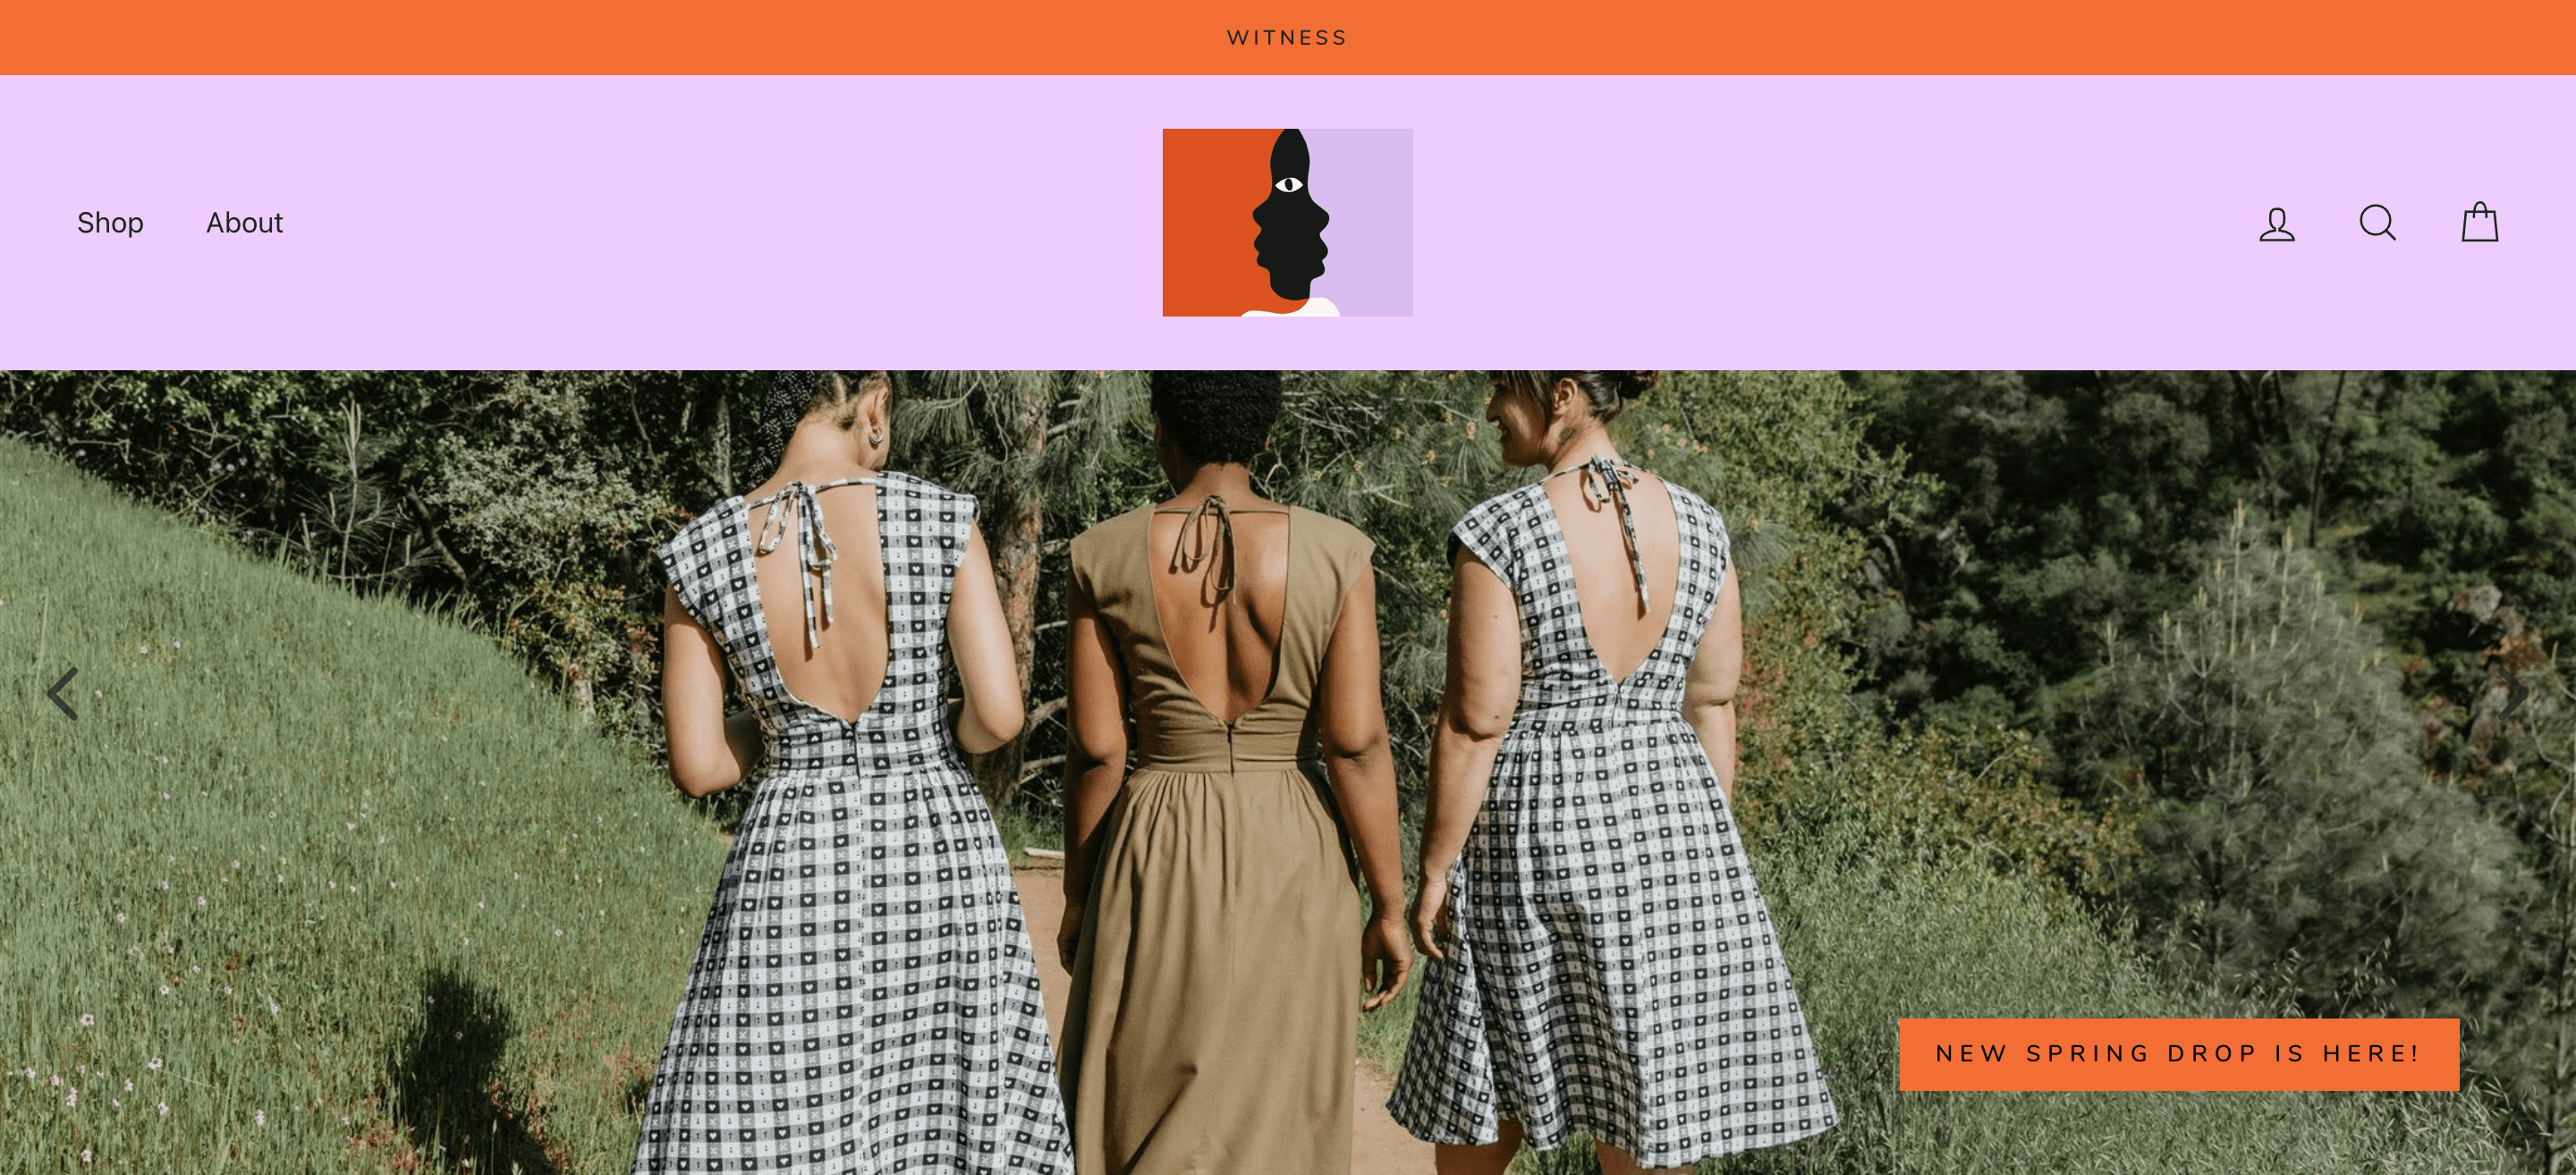 An image of Witness Oakland’s homepage. The banner image shows three women walking on a path surrounded by grass and trees. Two of the women are wearing black and white patterned dresses and the woman in the middle is wearing a brown dress in the same style. The call-to-action says: New Spring Drop is Here!